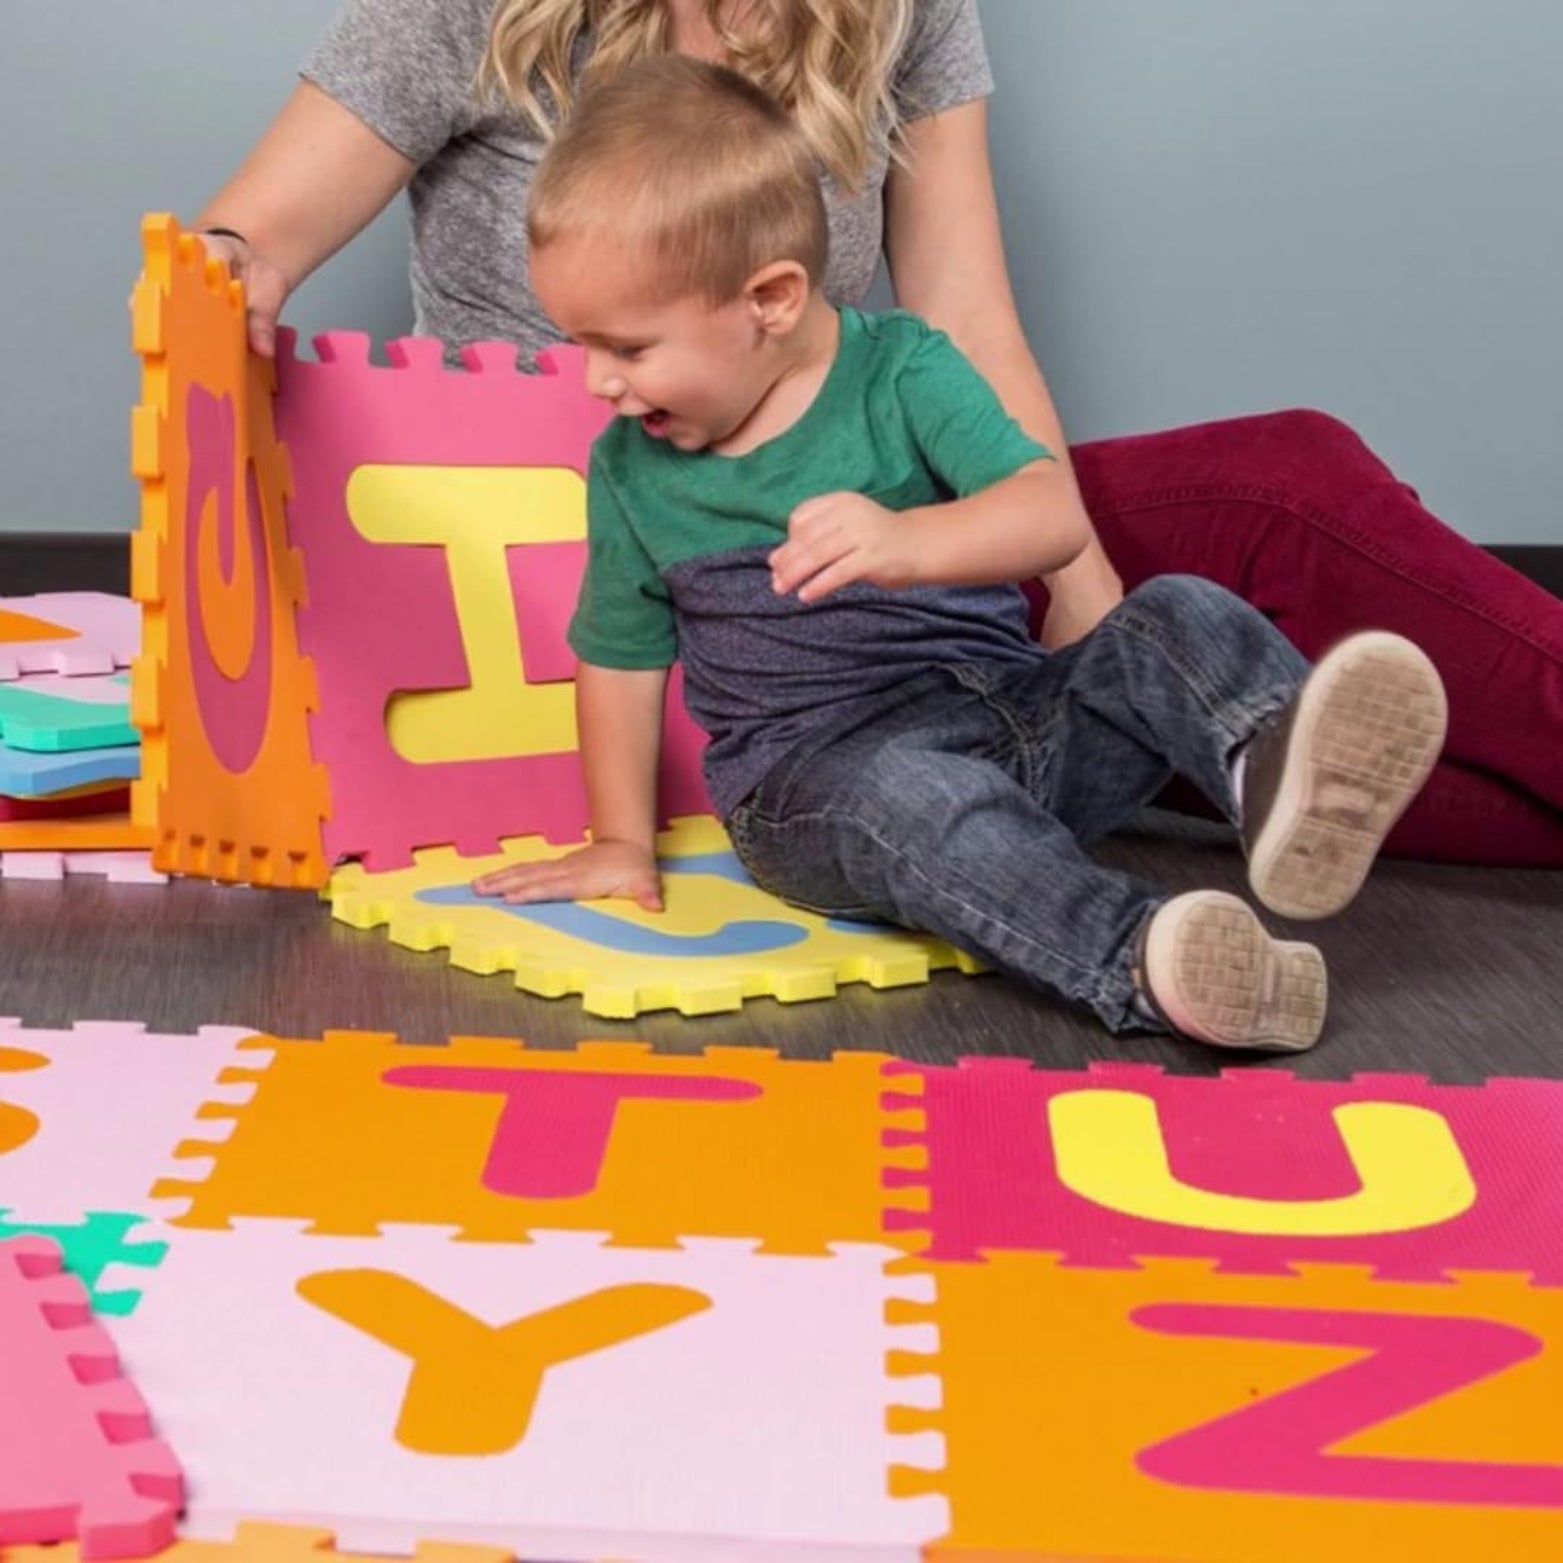 60-Piece Alphabet & Numbers Play Mat - Educational Foam Puzzle for Toddlers & Kids, 36 SqFt - XL